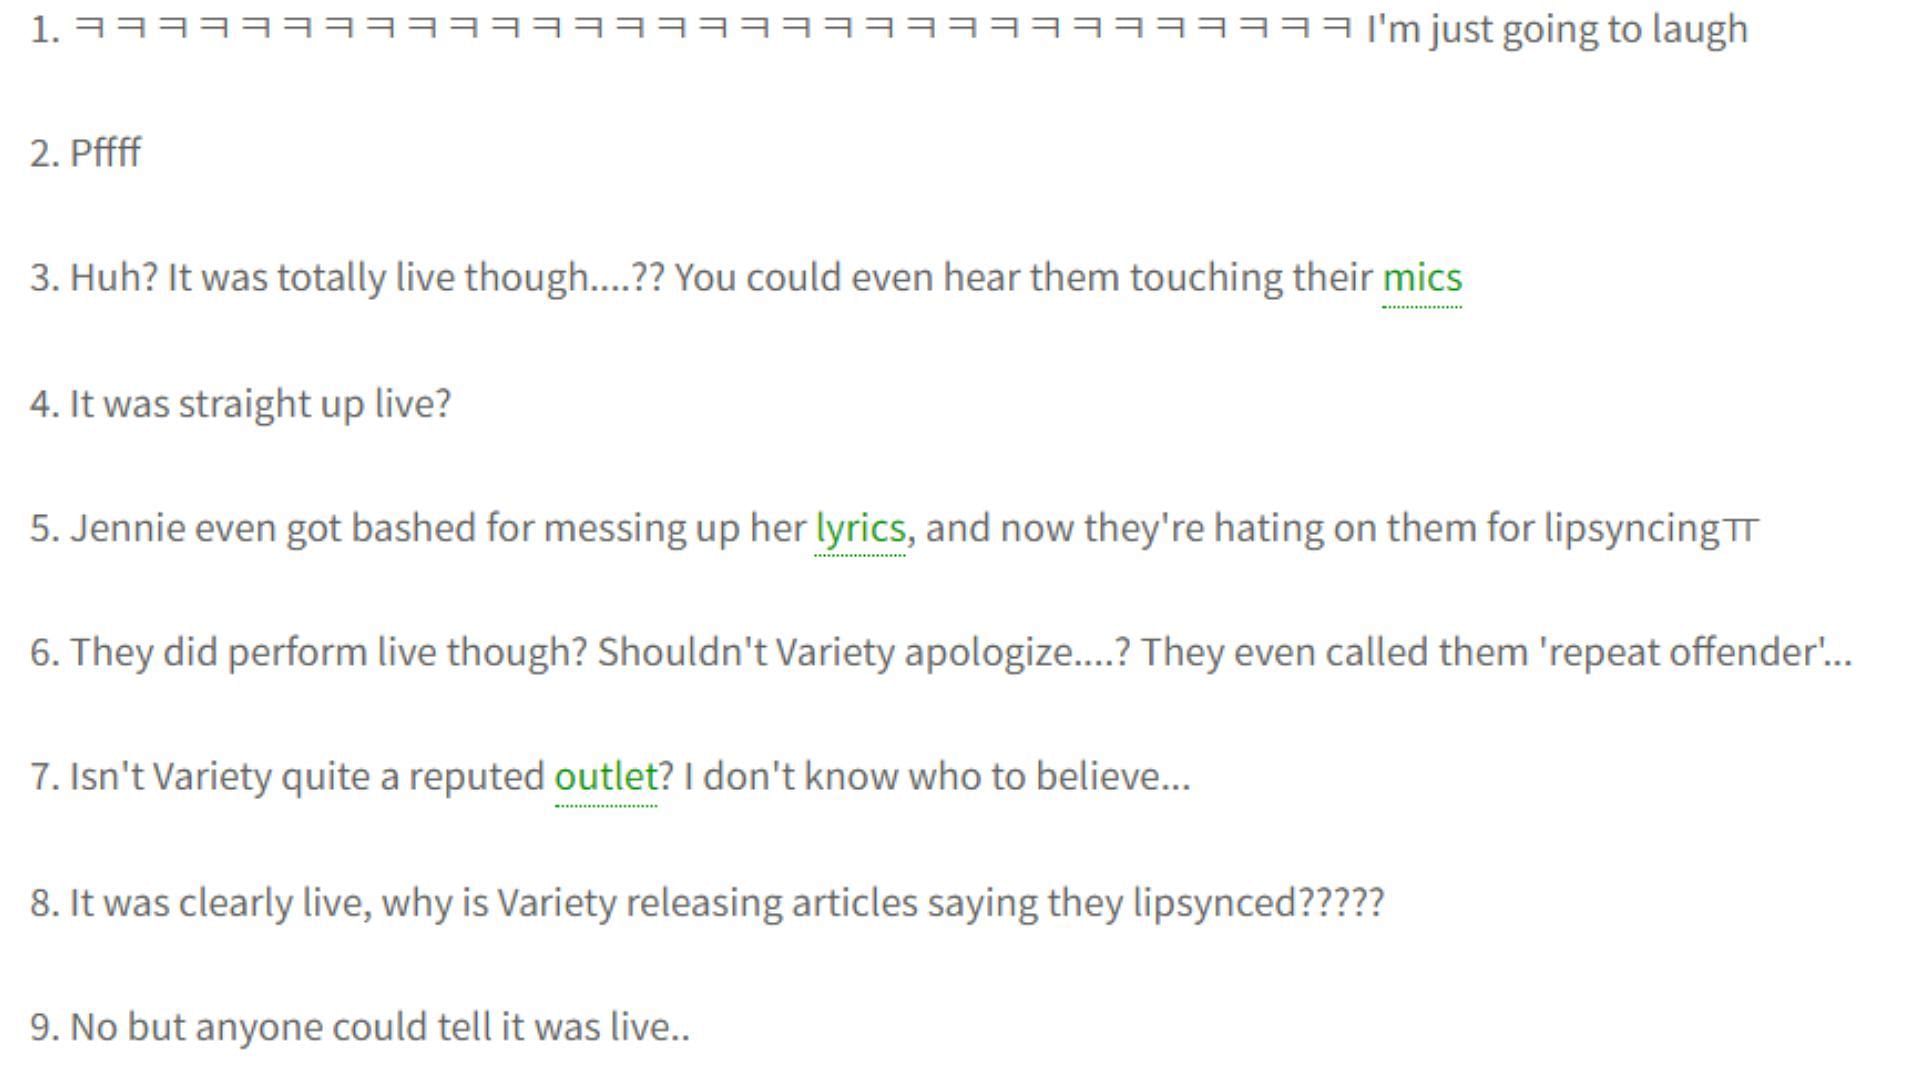 South Korean netizens&#039; comment on Variety&#039;s article (Image via pannchoa)